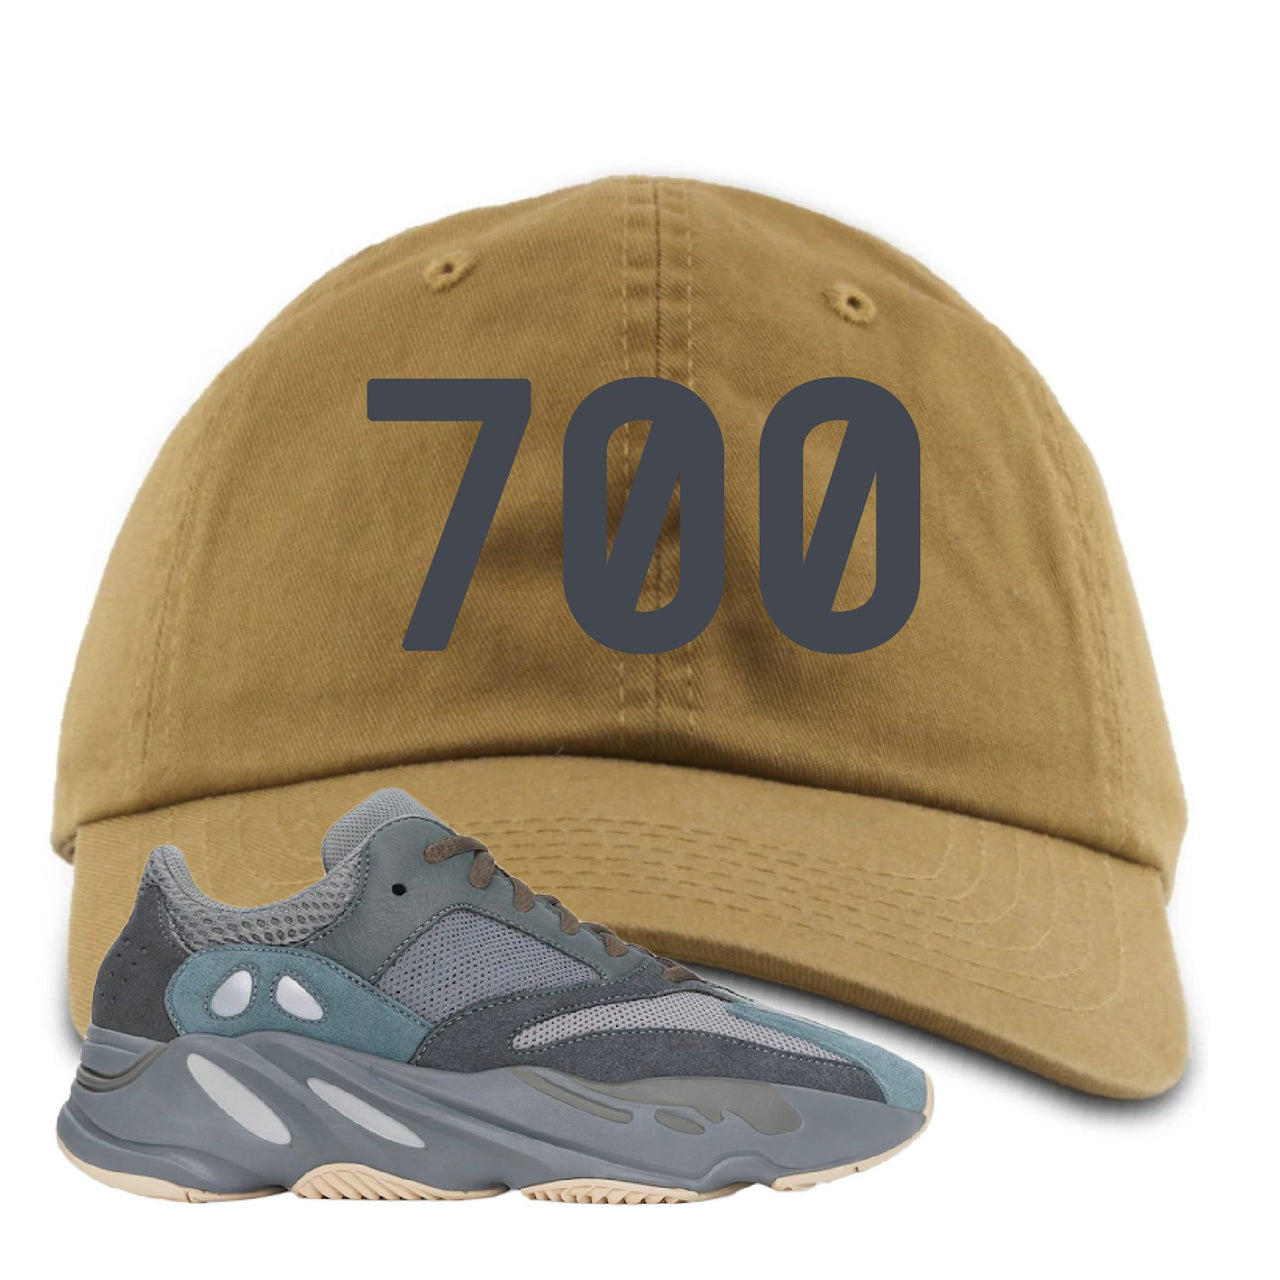 Yeezy Boost 700 Teal Blue 700 Timberland Sneaker Hook Up Dad Hat